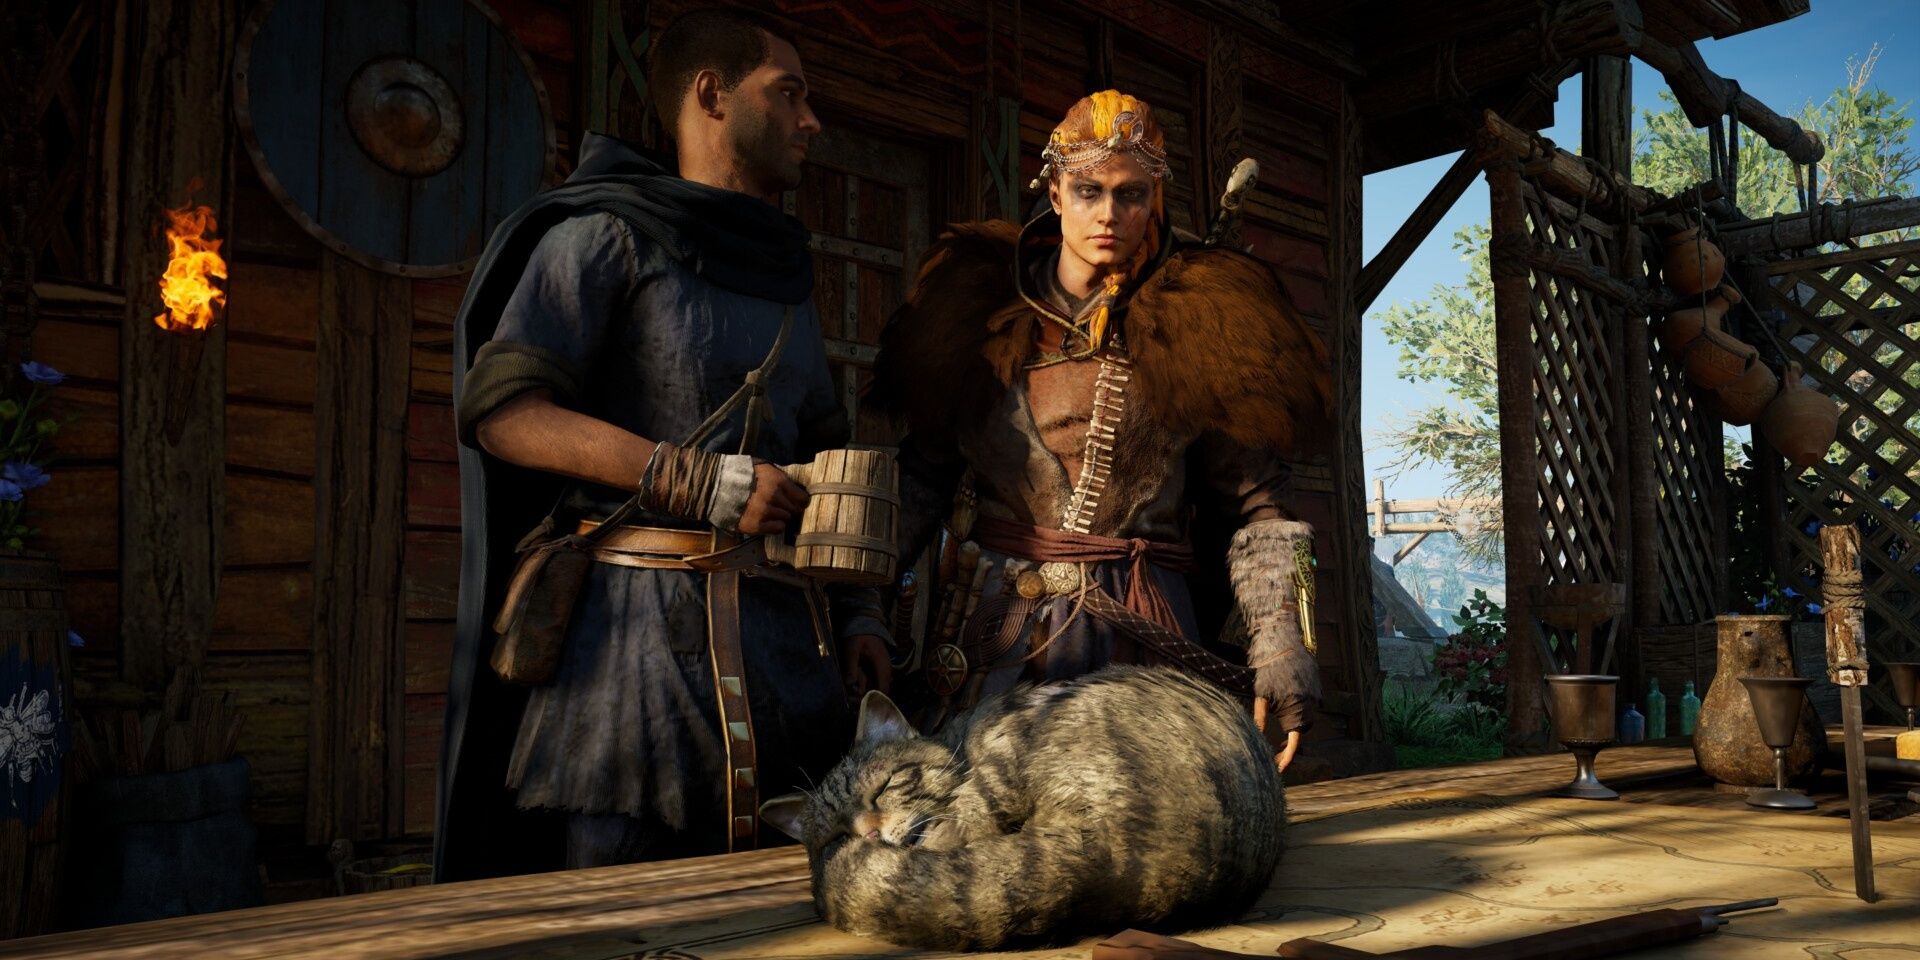 Pierre and Eivor looking at a cat in Assassin's Creed Valhalla.